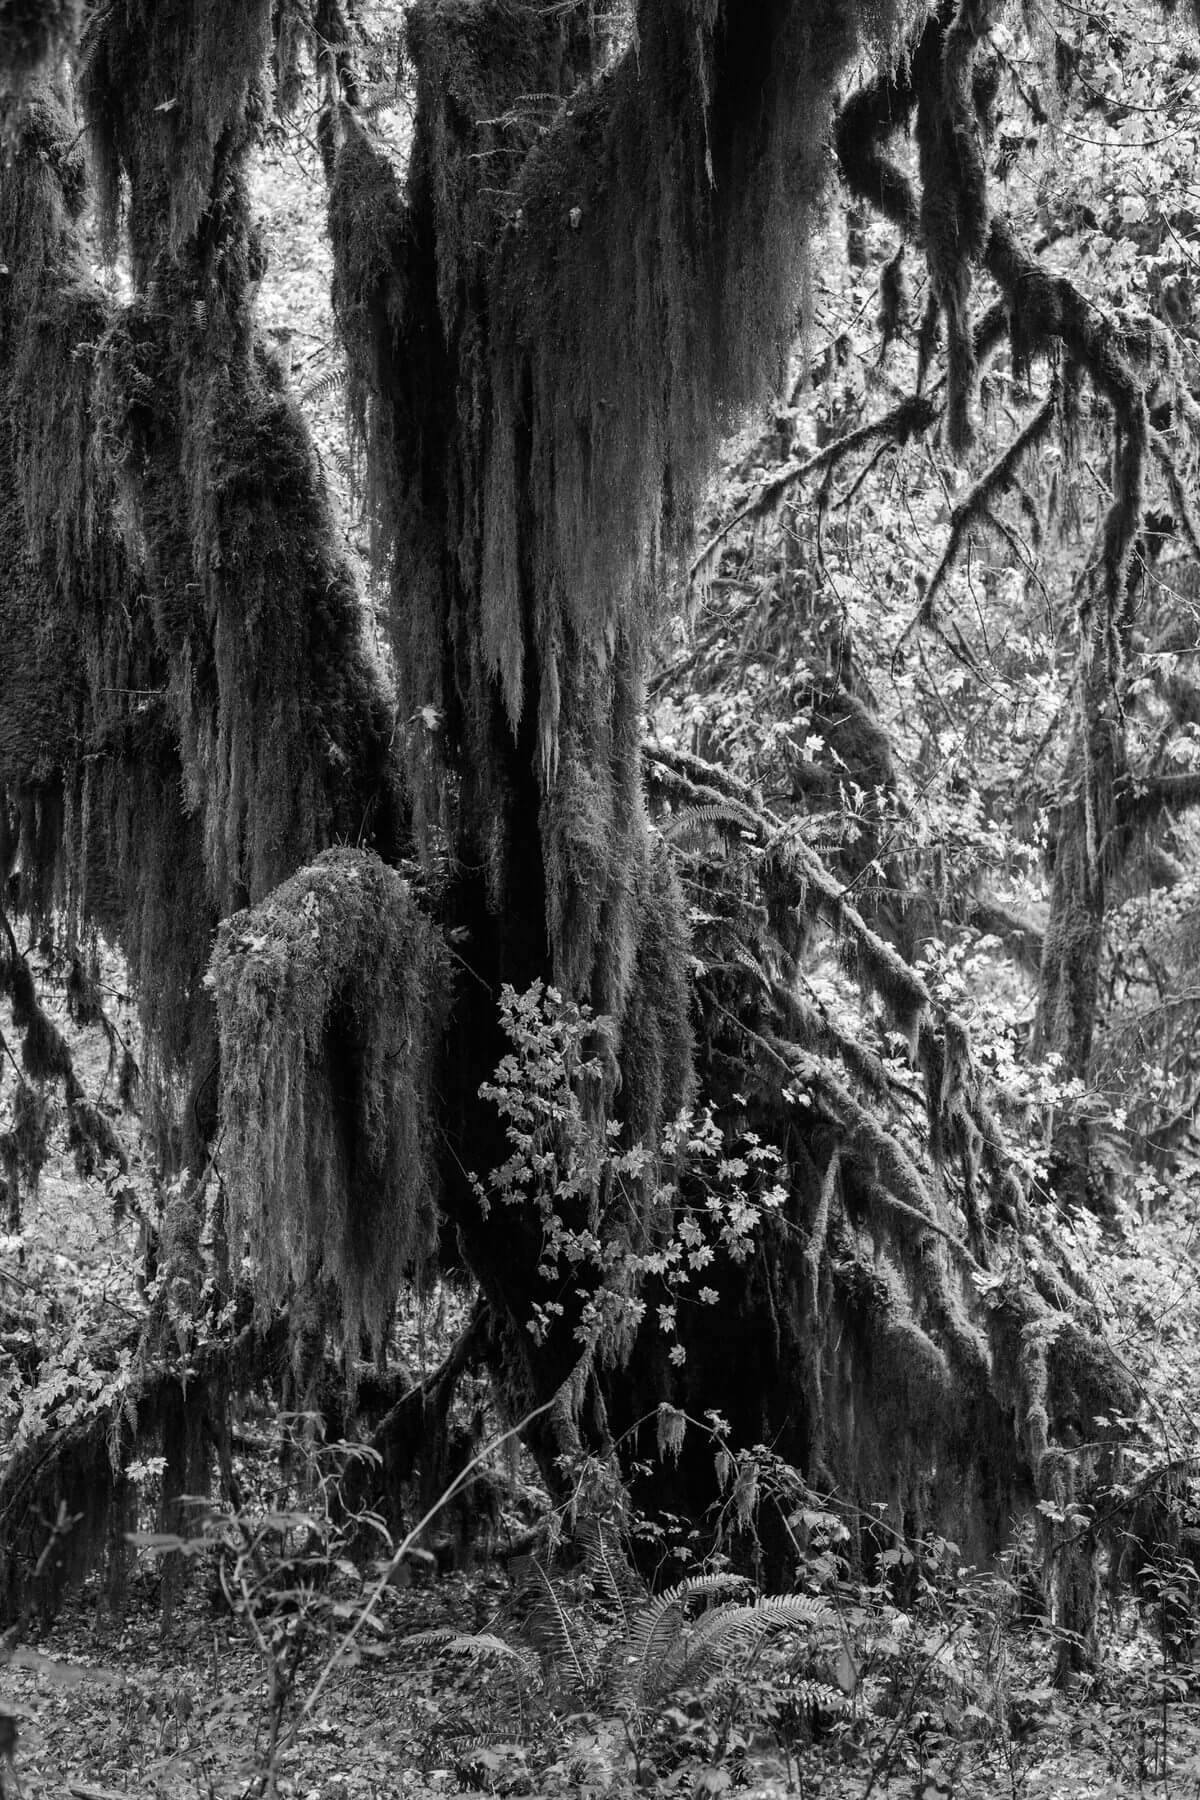 Olympic-National-Park-Washington-black-and-white-fine-art-photography-by-Studio-L-photographer-Laura-Schneider-_9182